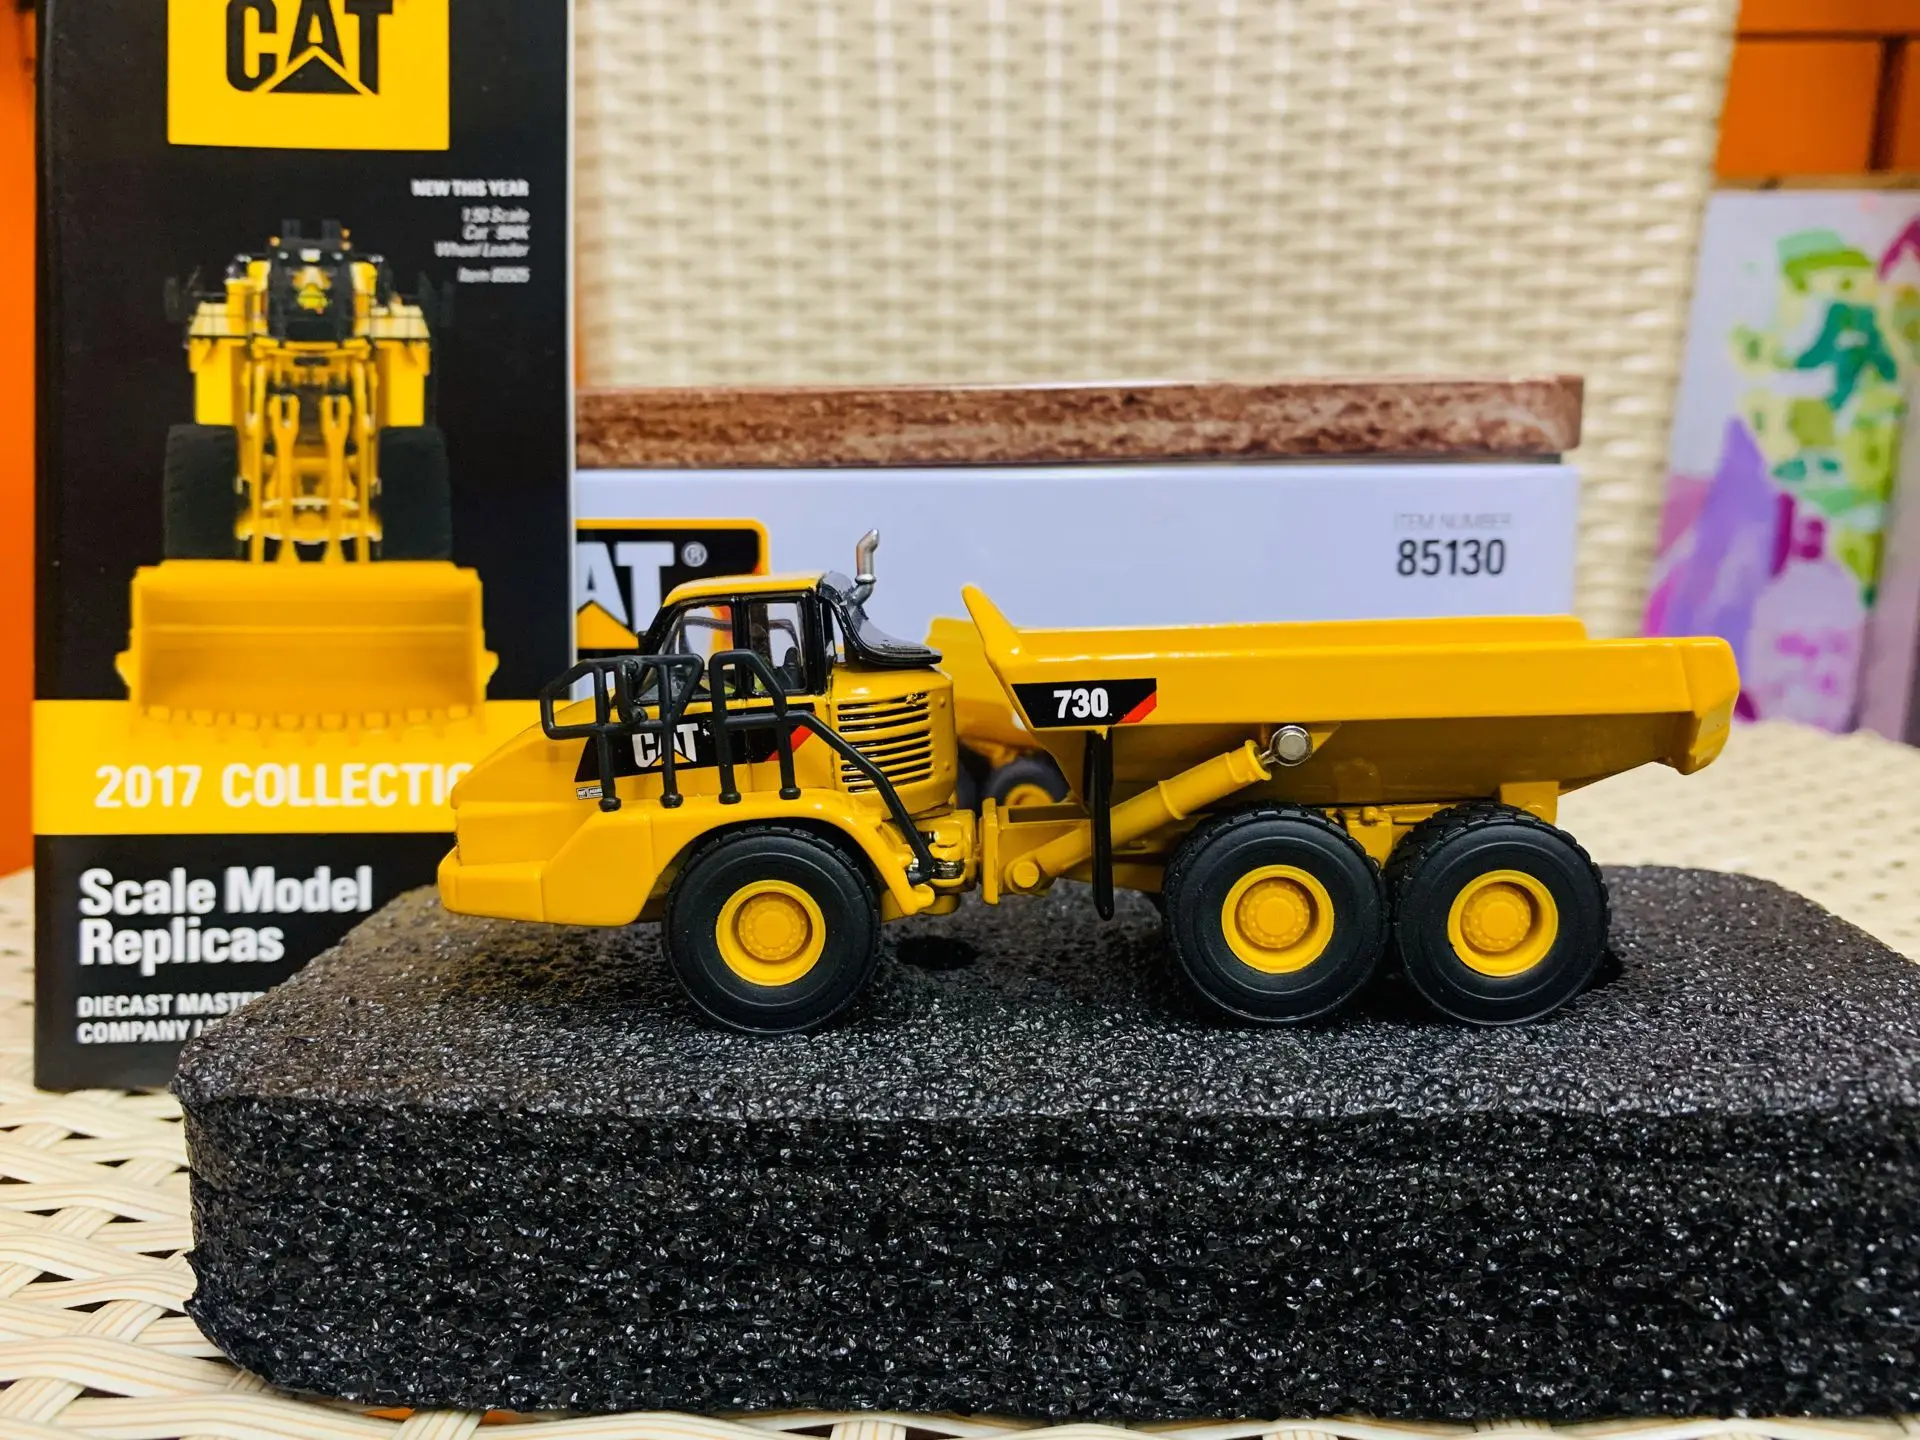 Caterpillar Cat 730 Articulated Truck HO Scale 1:87 By DieCast Masters DM85130